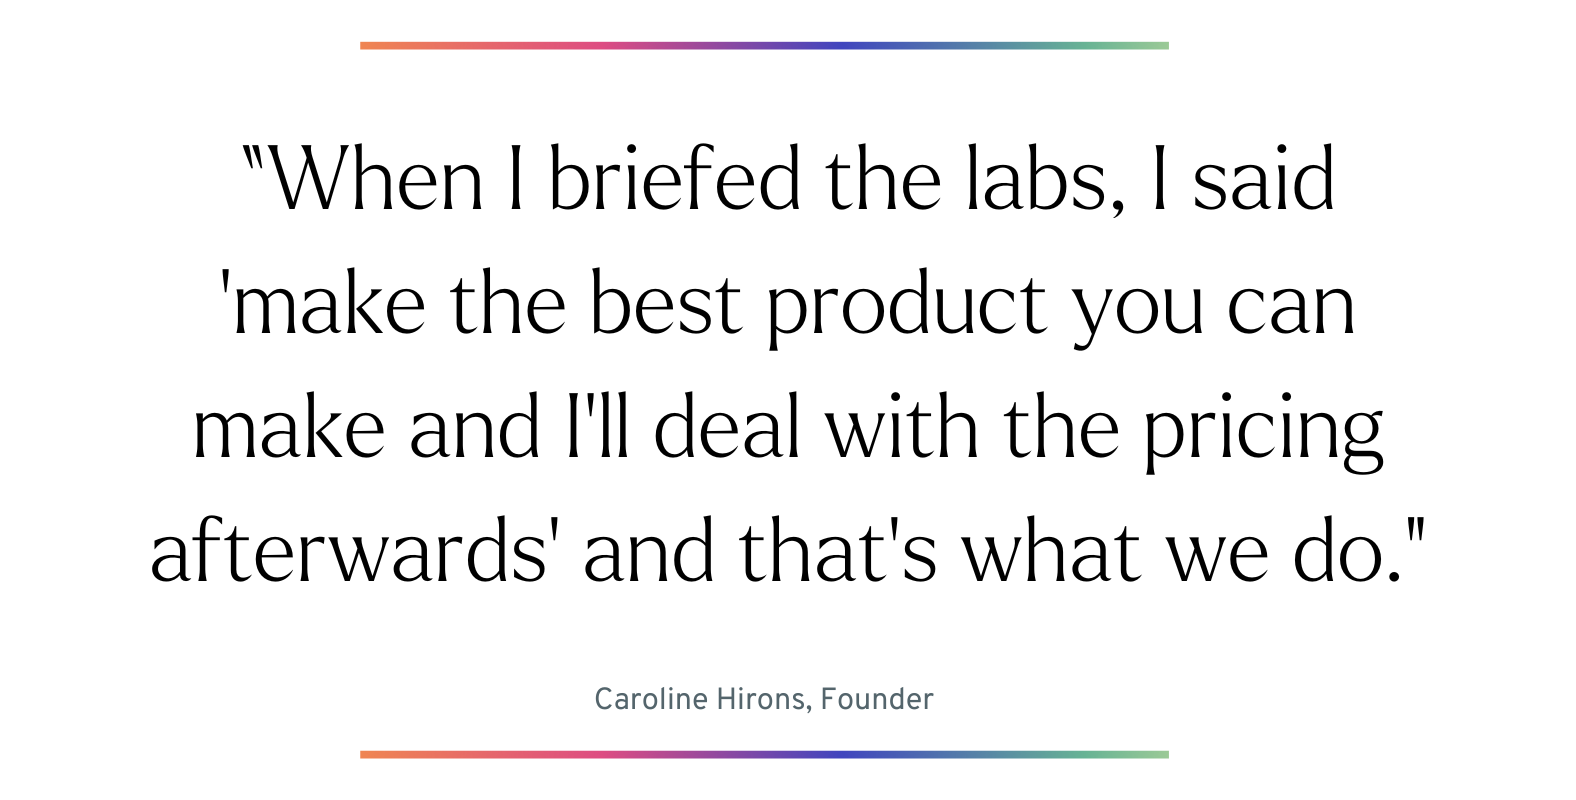 When I briefed the labs, I said ‘make the best product you can make and I’ll deal with the pricing afterwards’ and that’s what we do. 